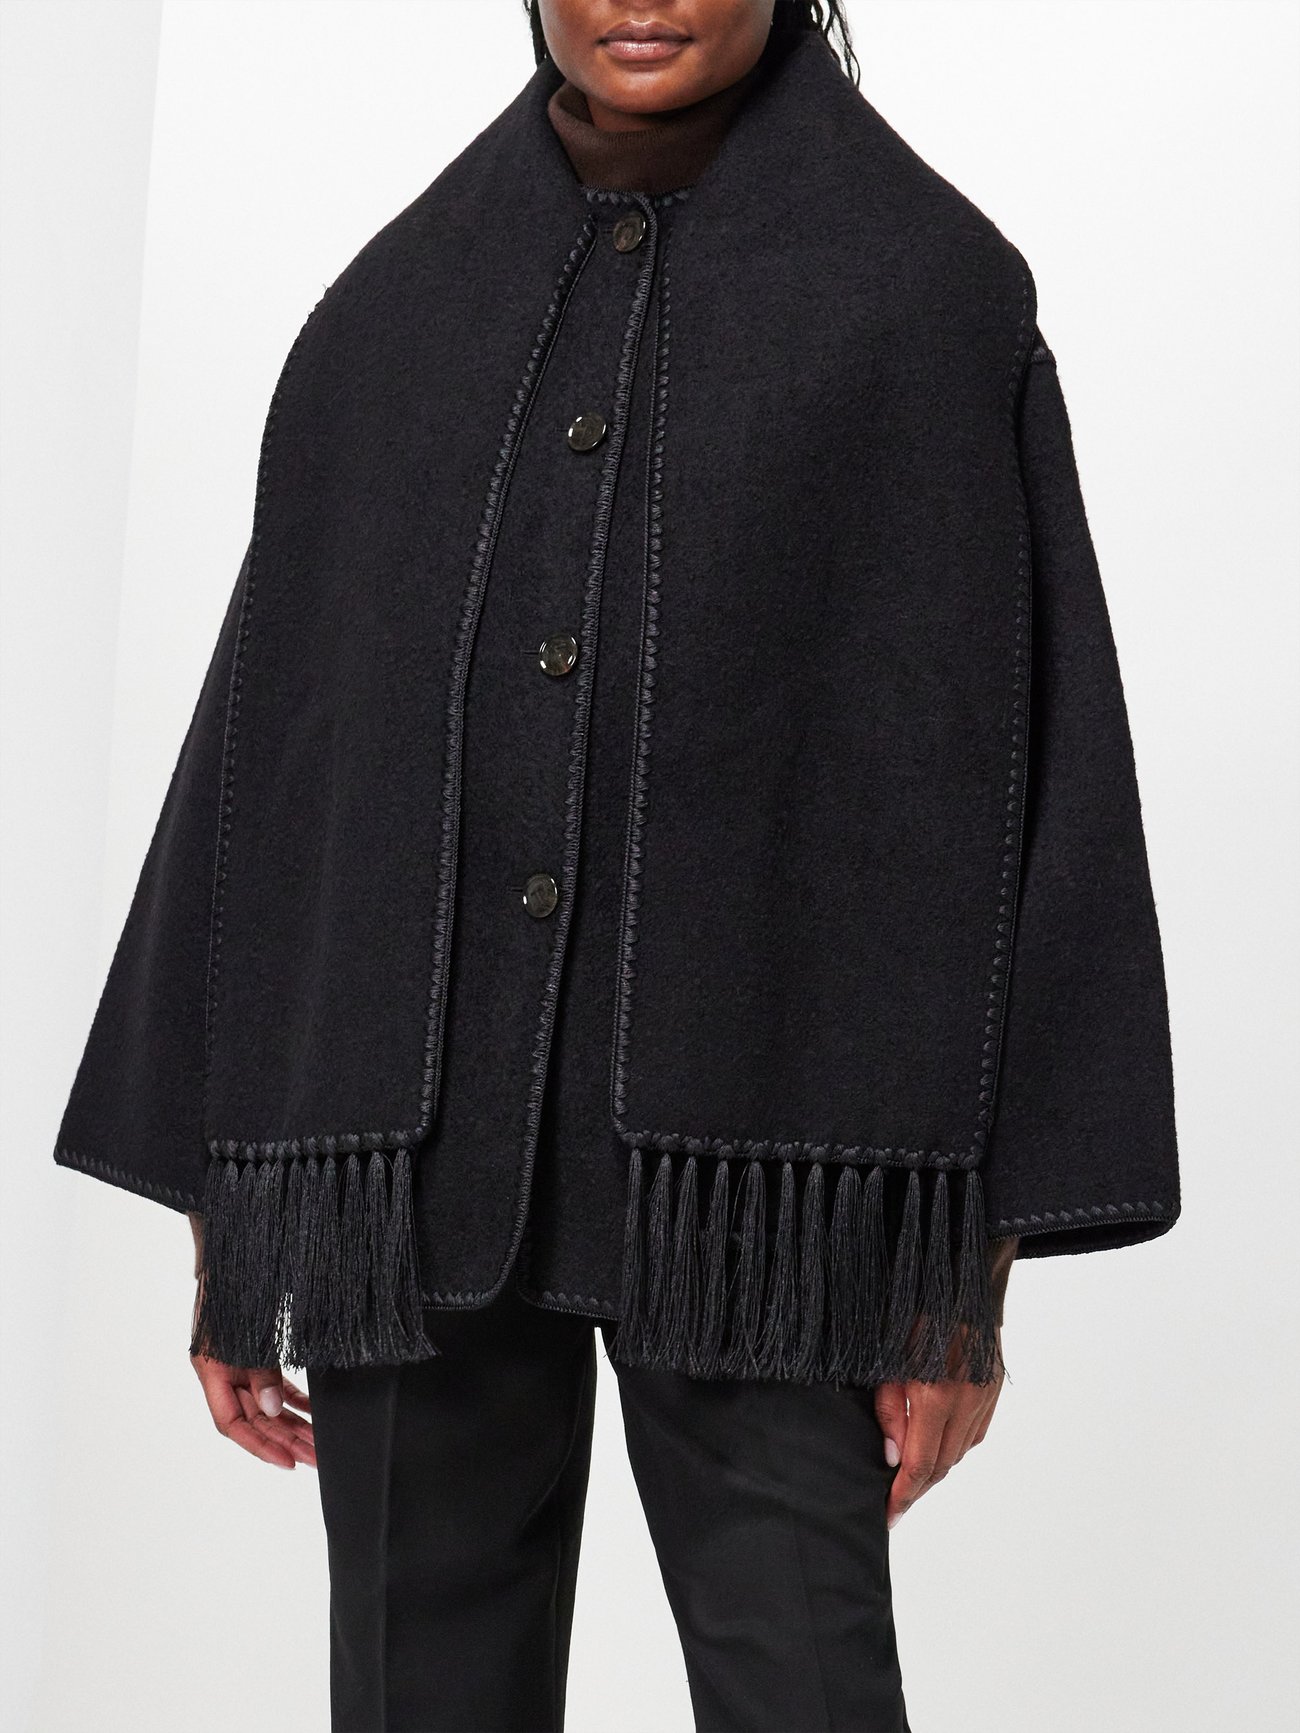 | Black MATCHES scarf-neck UK Embroidered Toteme | wool-blend jacket